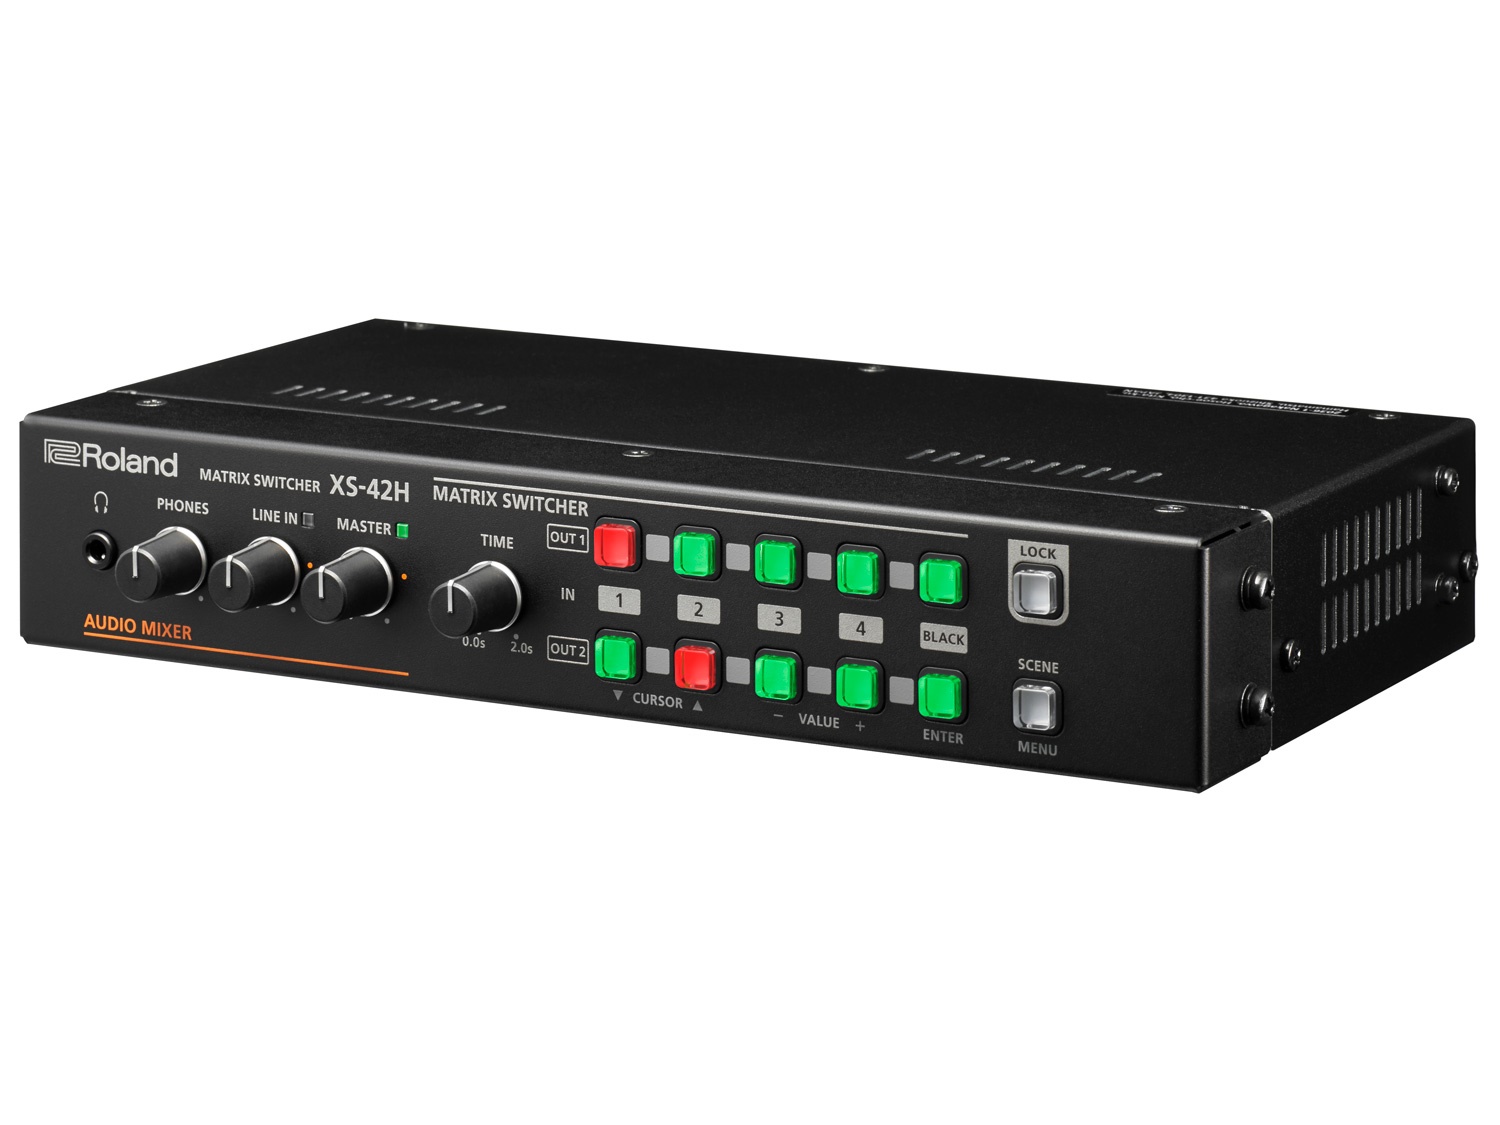 XS-42H 4-In x 2-Out Multi-Format AV Matrix Switcher by Roland